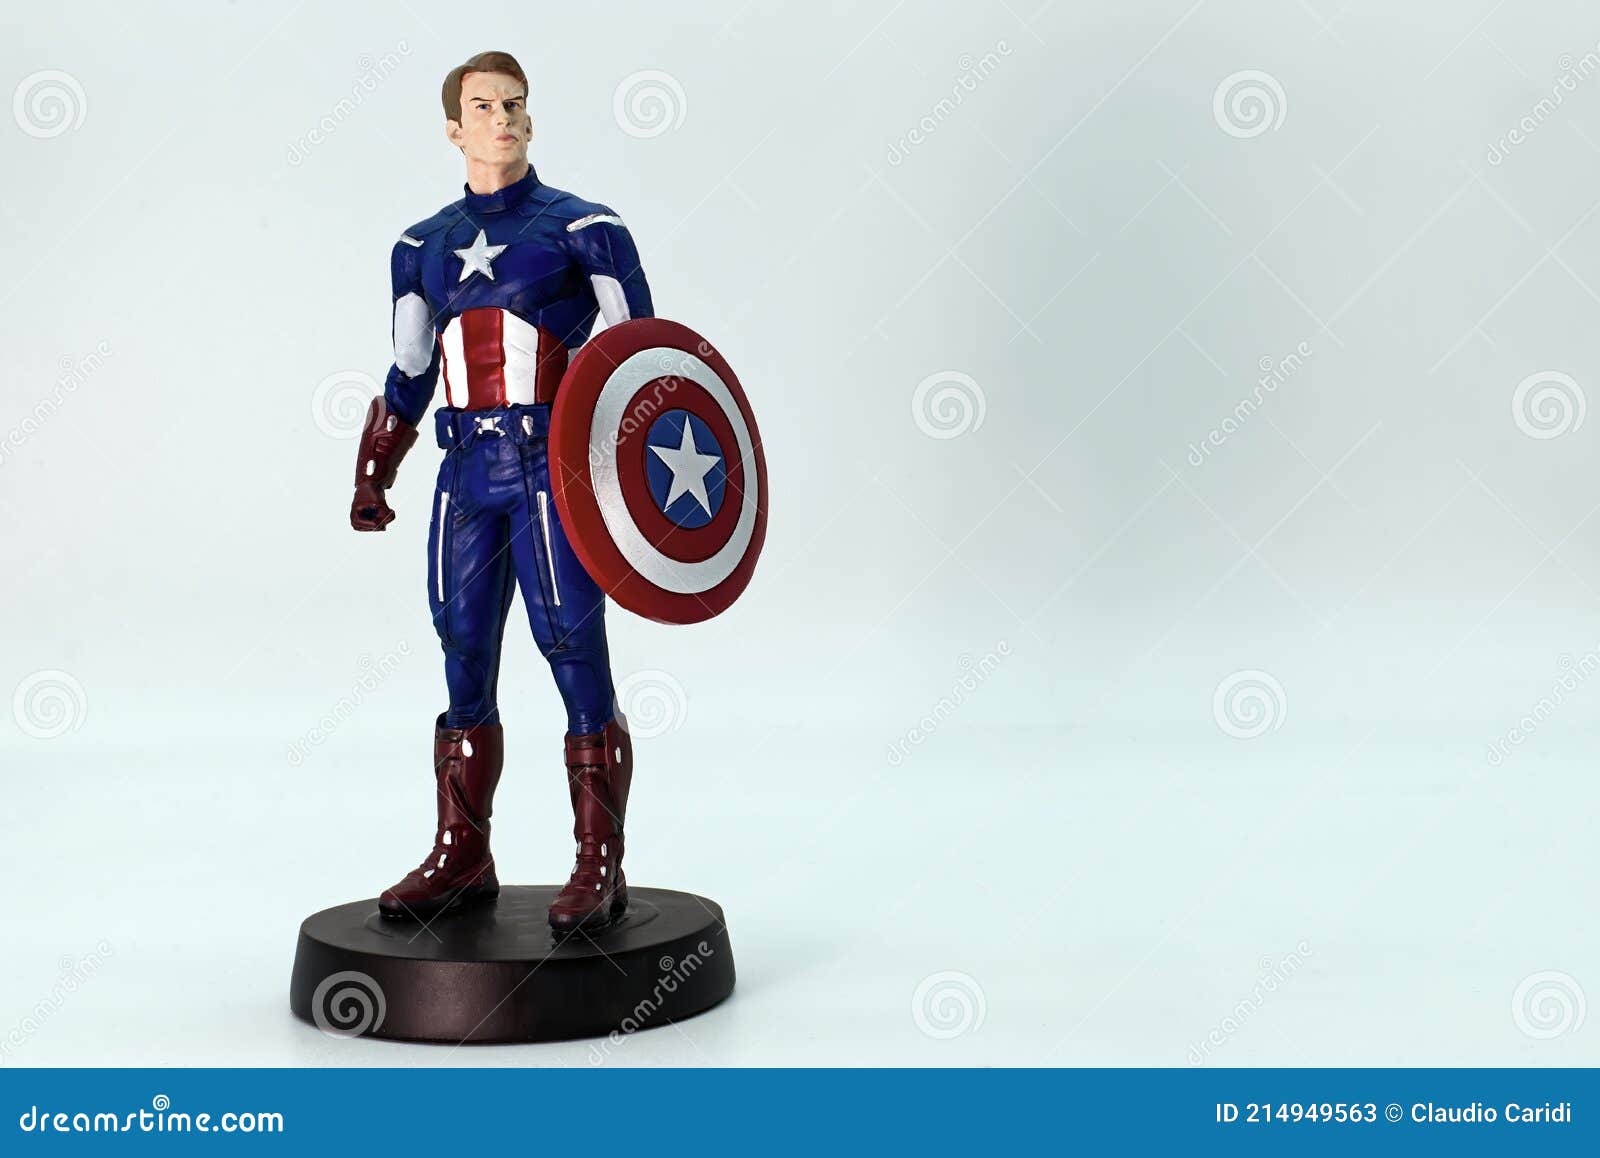 Captain America Action Figure Isolated on White Background. Editorial Stock  Photo - Image of film, culture: 214949563